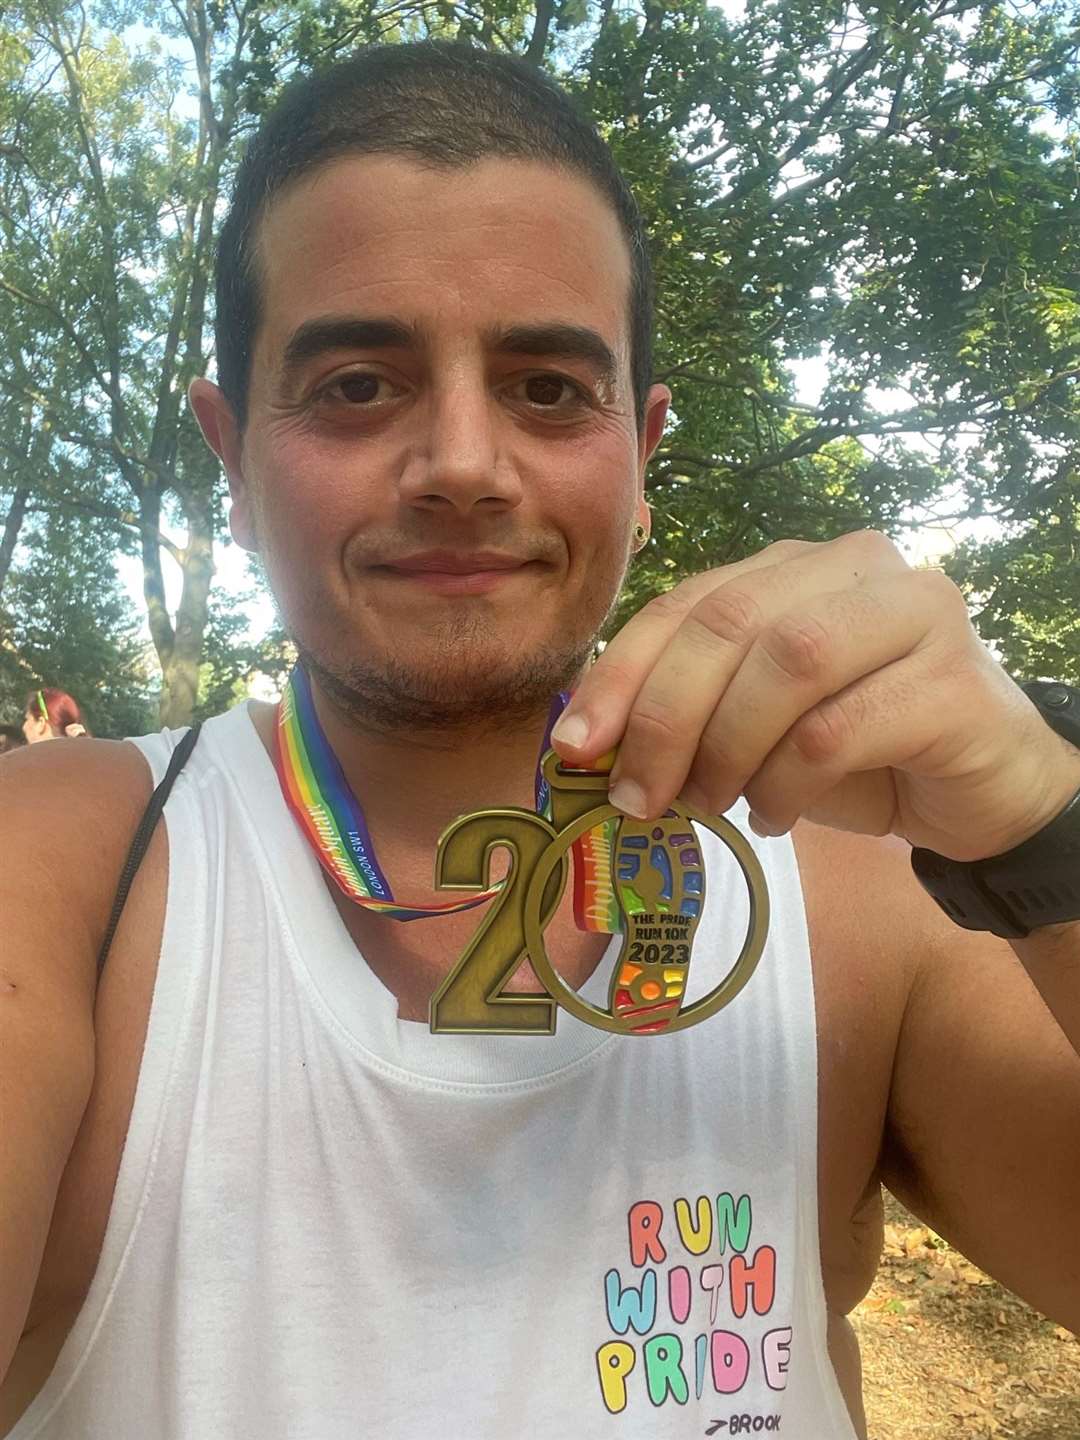 Cel Smith, pictured with their medal for the 2023 Pride Run 10k, said they feel it is important to be ‘visible’ as an LGBT+ person (Handout/PA)